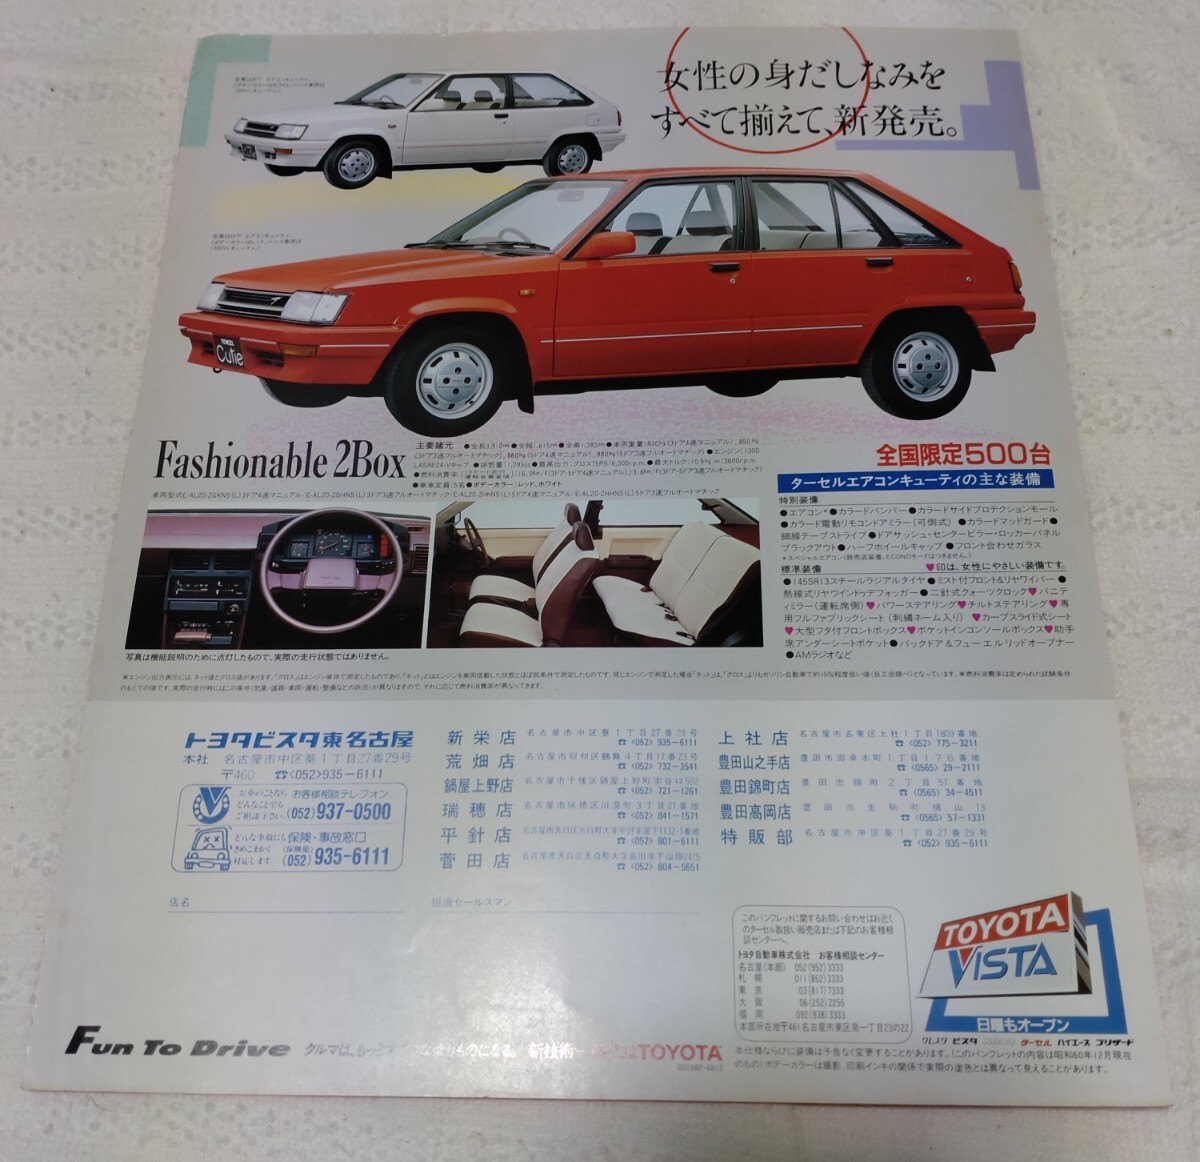  Toyota Tercell air conditioner cutie special specification catalog 